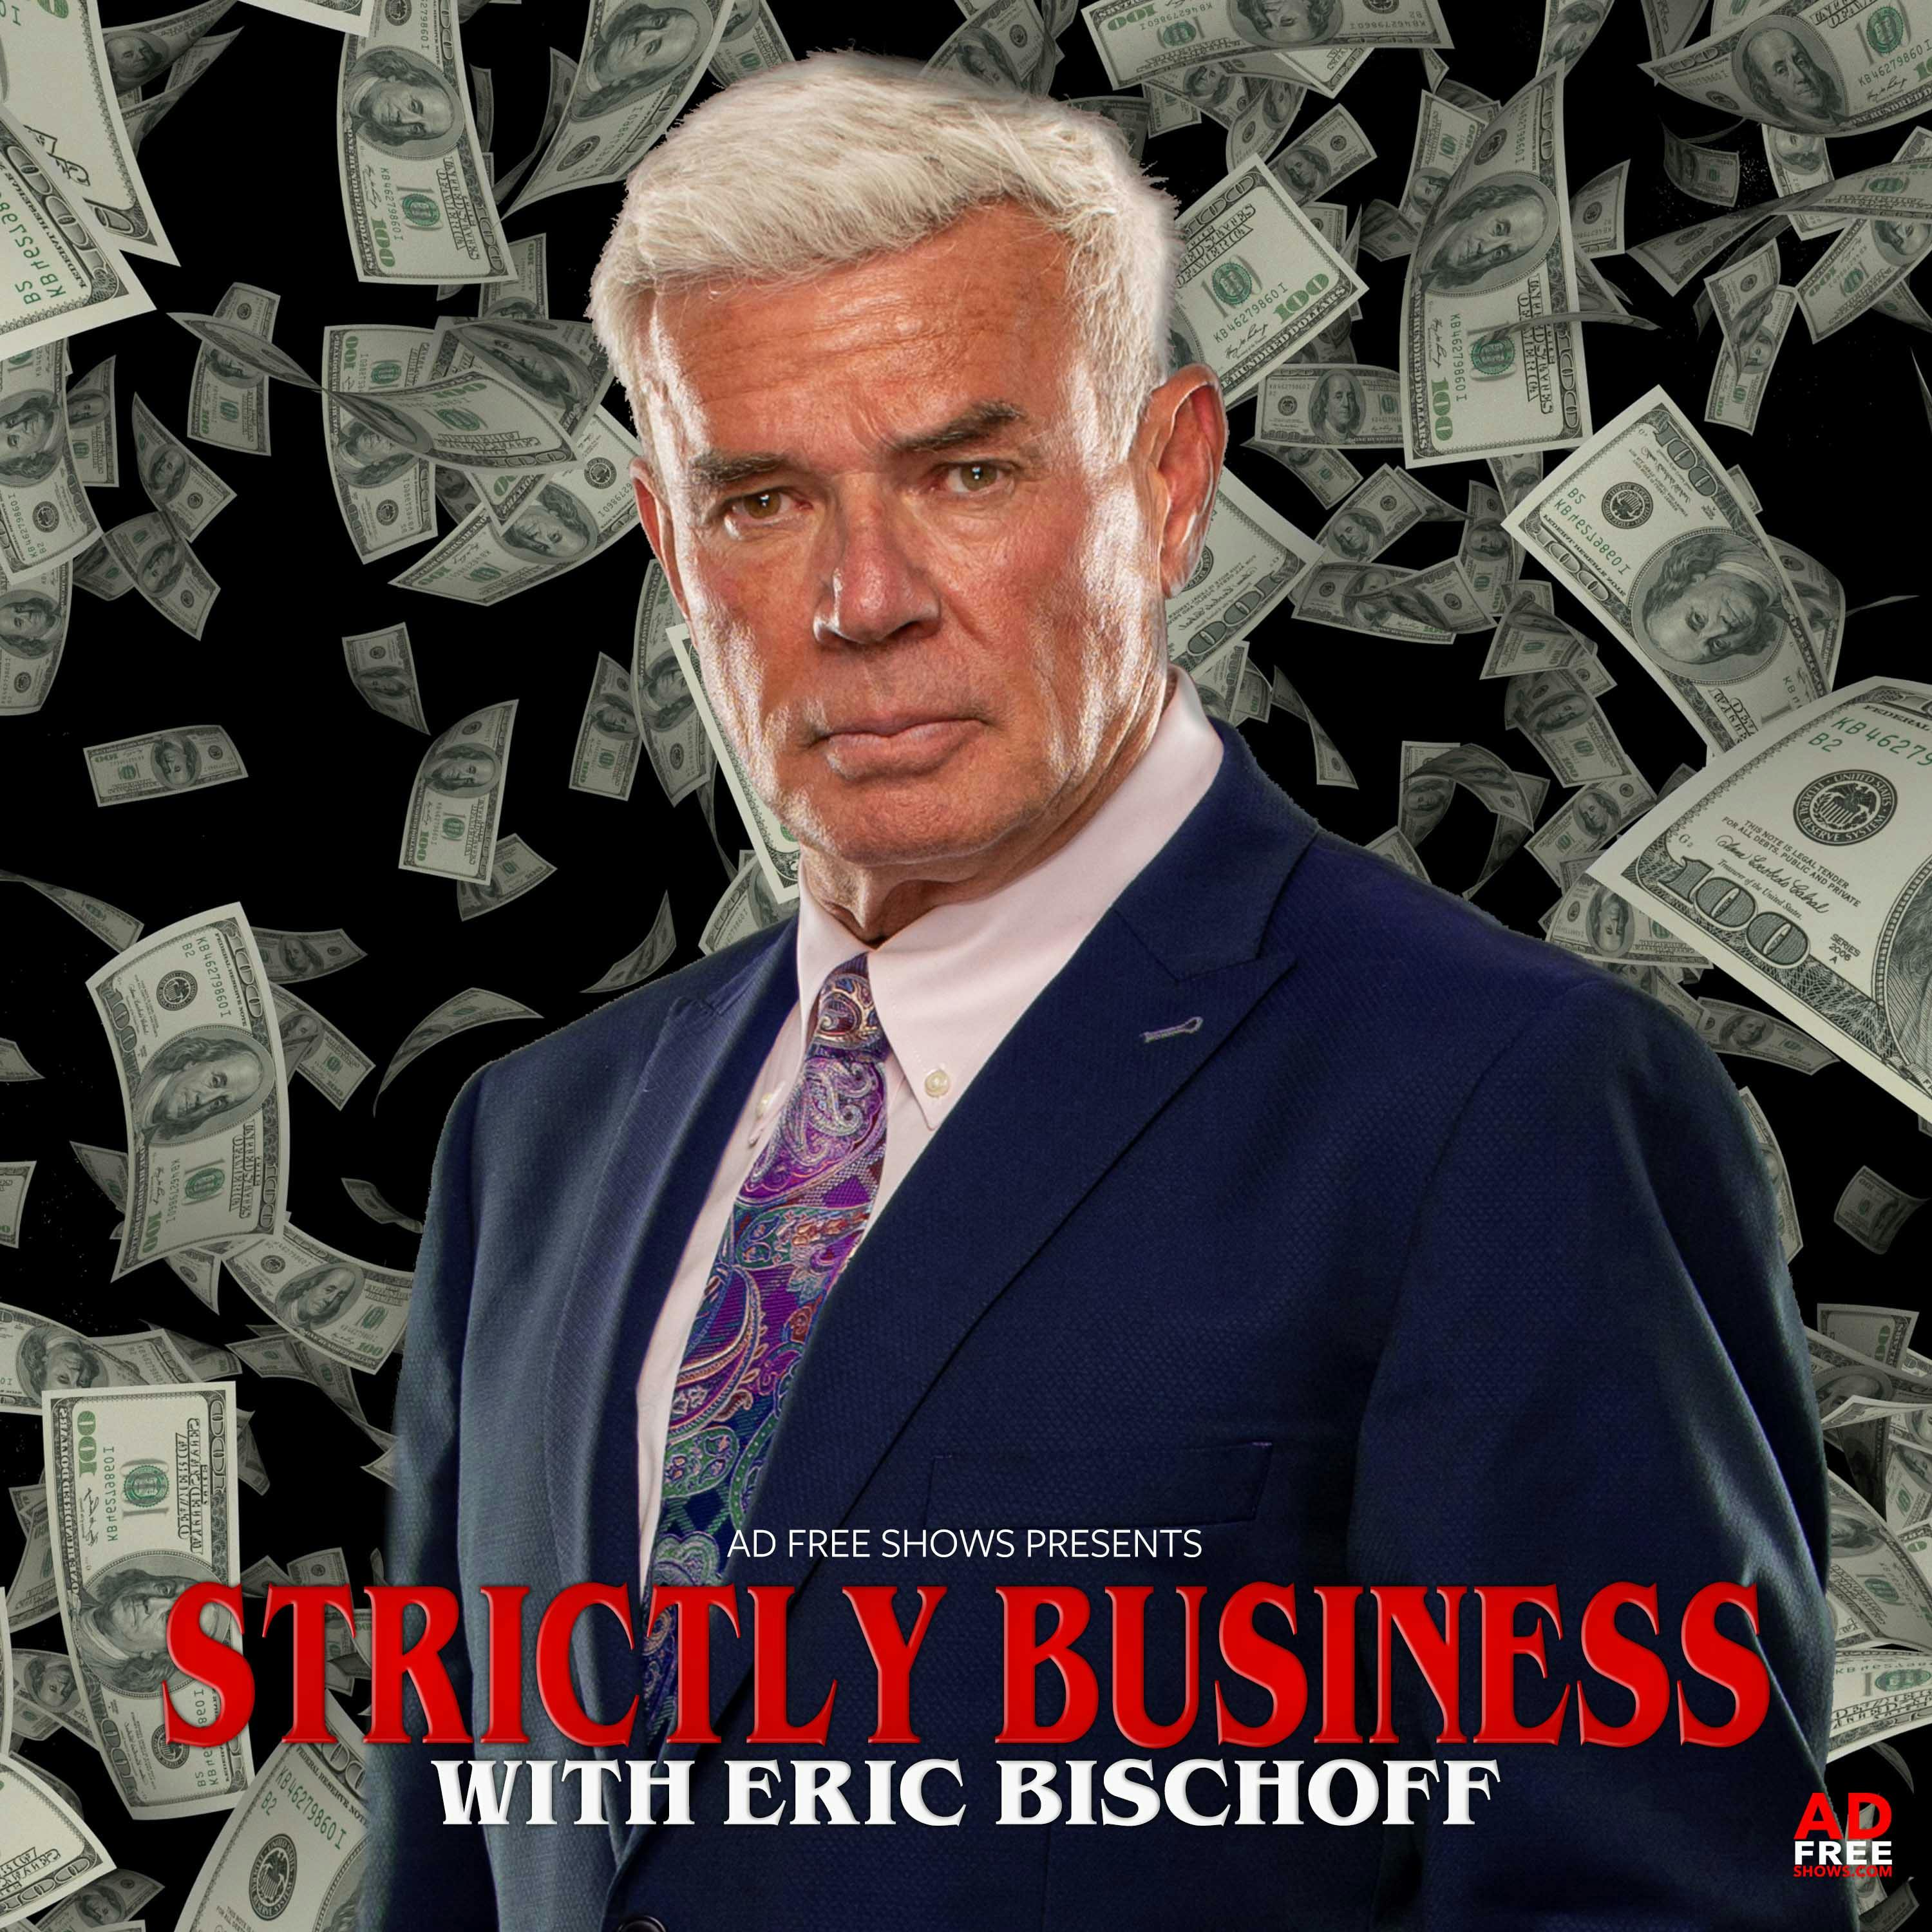 Strictly Business with Eric Bischoff #45: BREAKING NEWS - WWE Changes & Layoffs